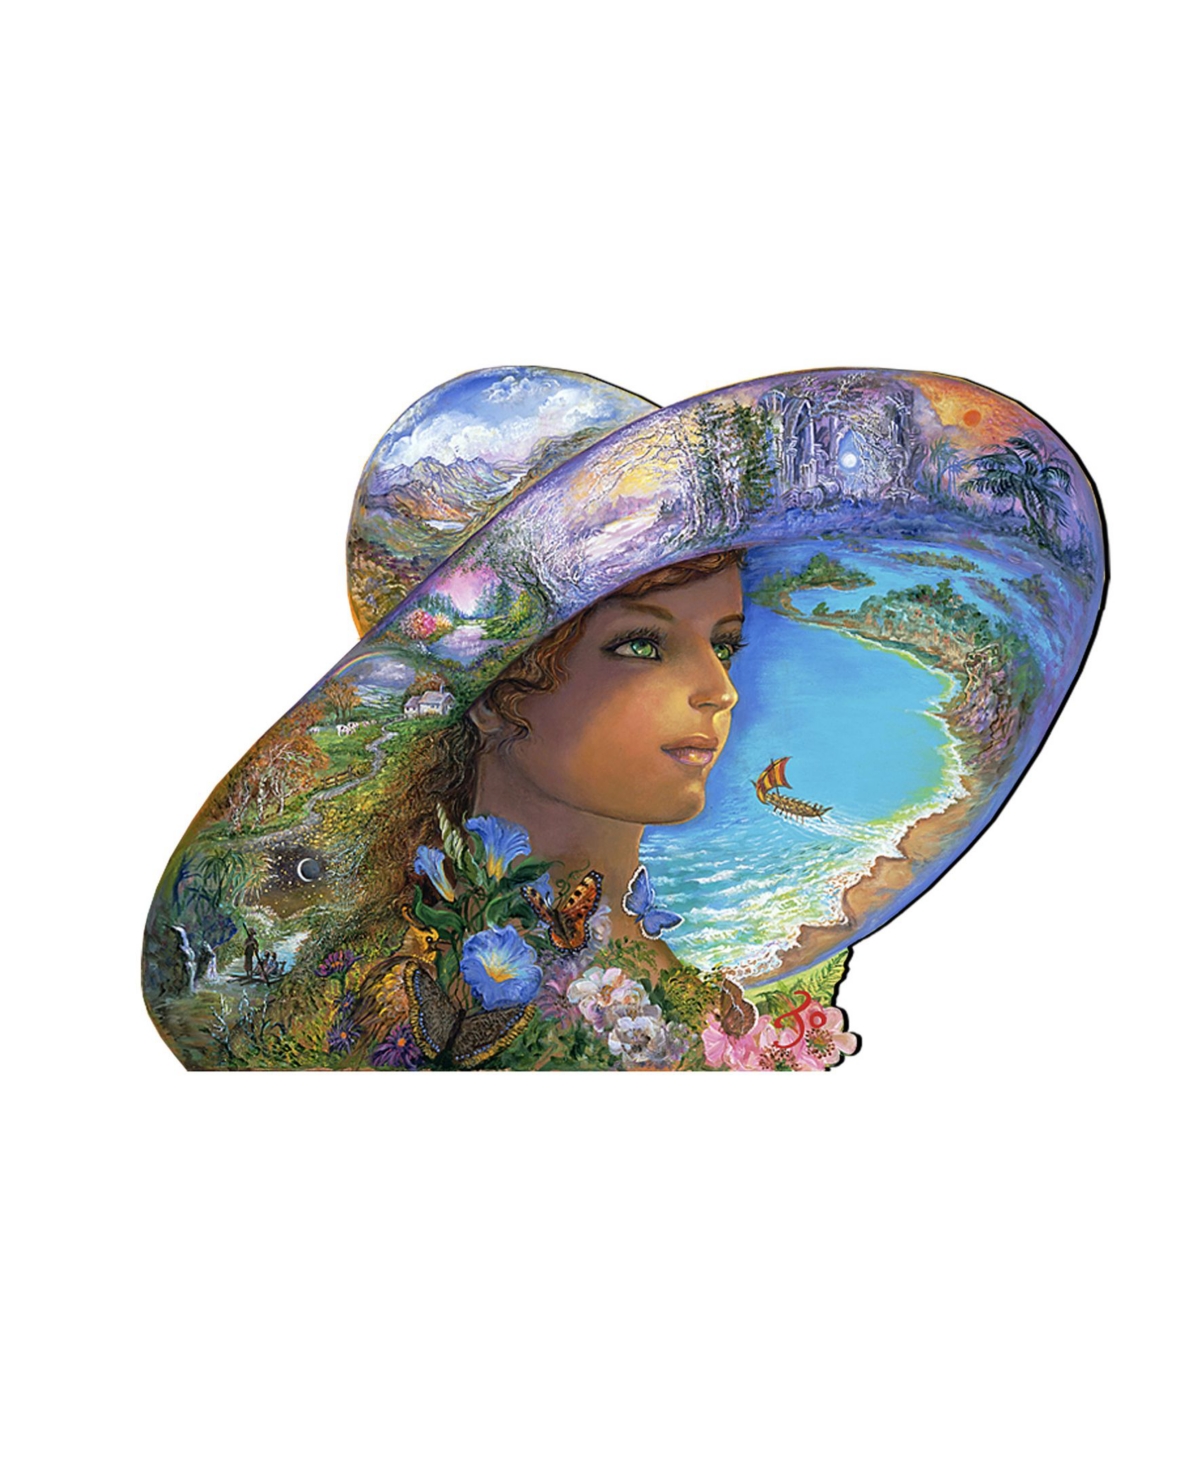 Hat of Timeless Places Wall and Over The Door Wooden Hanger by Josephine Wall - Multi